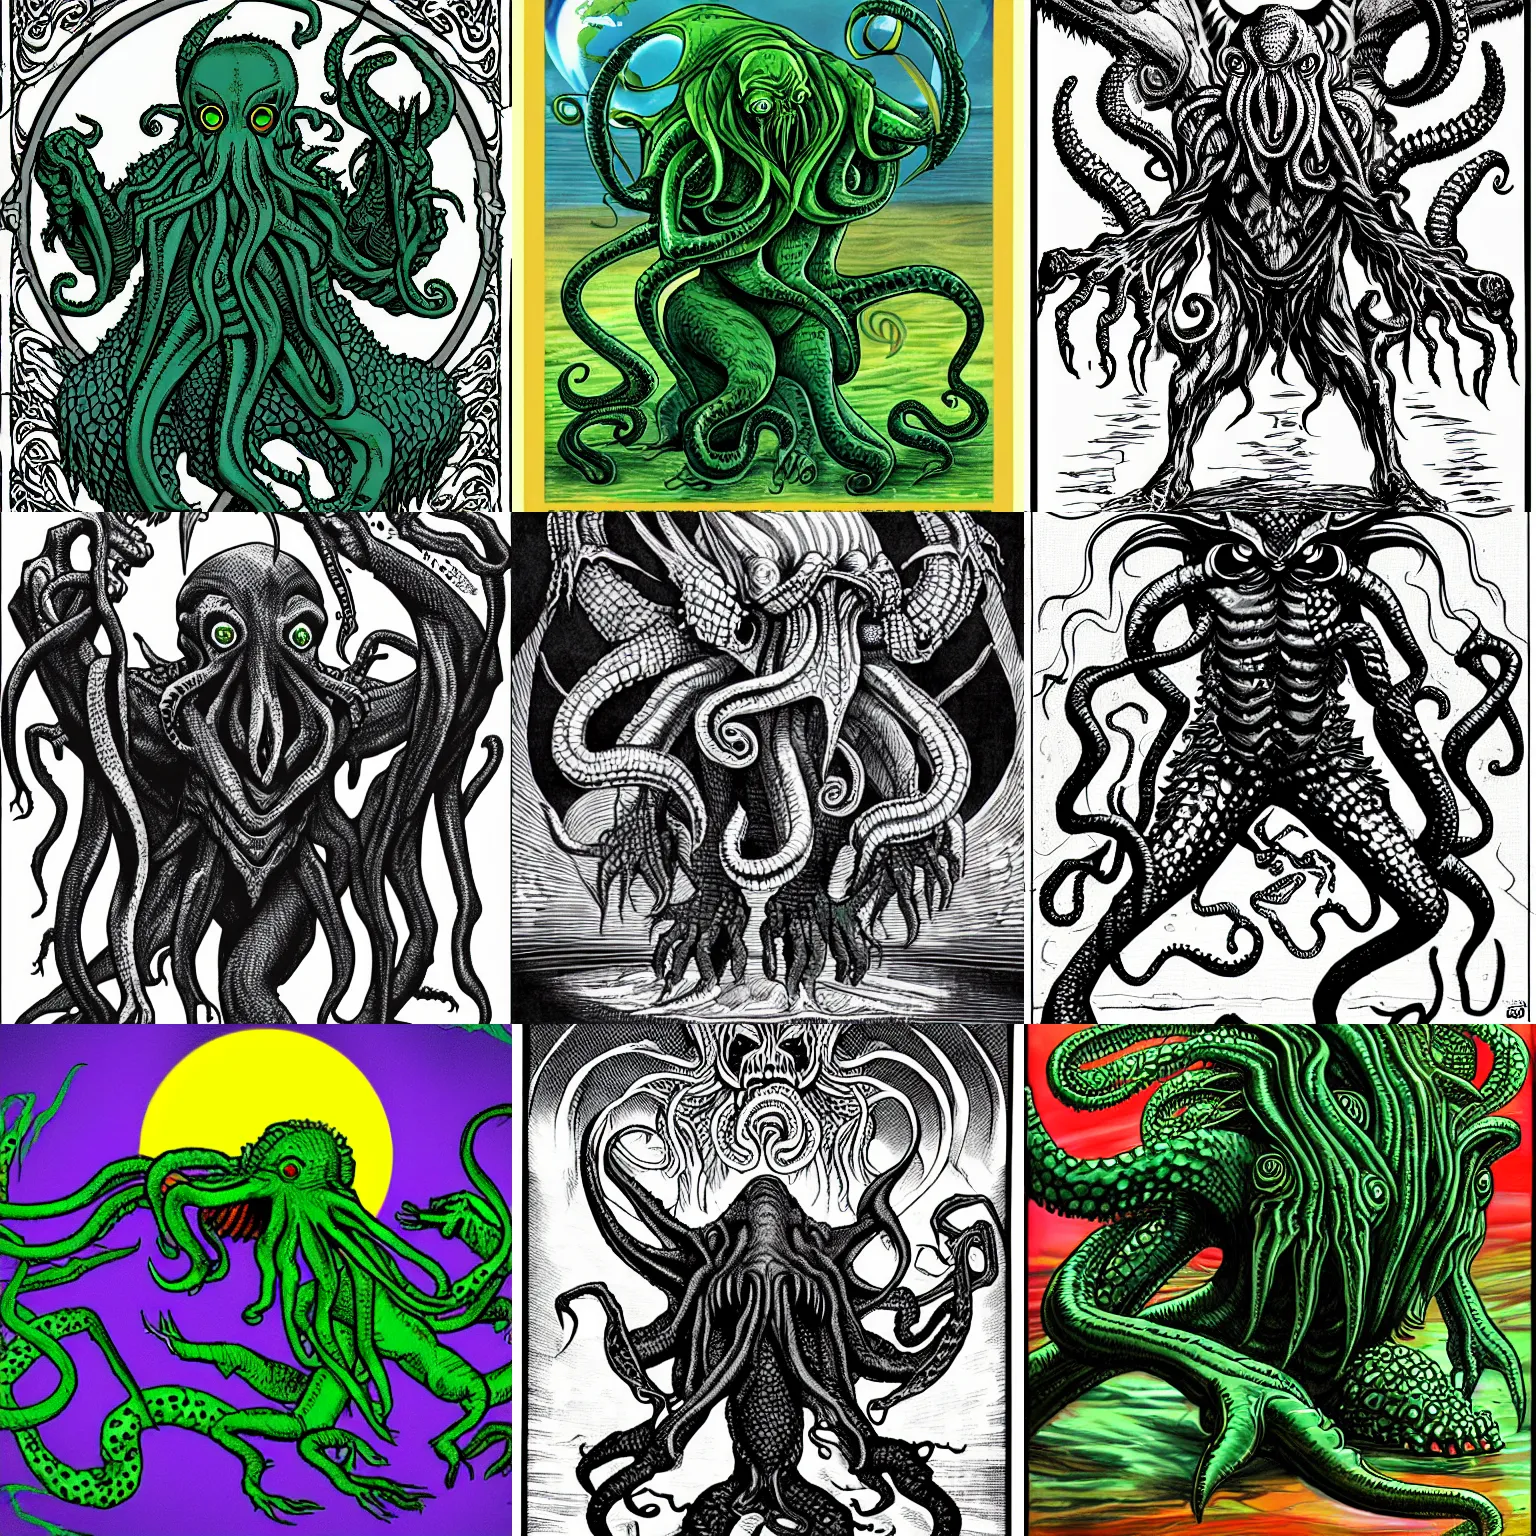 Prompt: cthulhu controlling the world with reptilians, nightmare art style